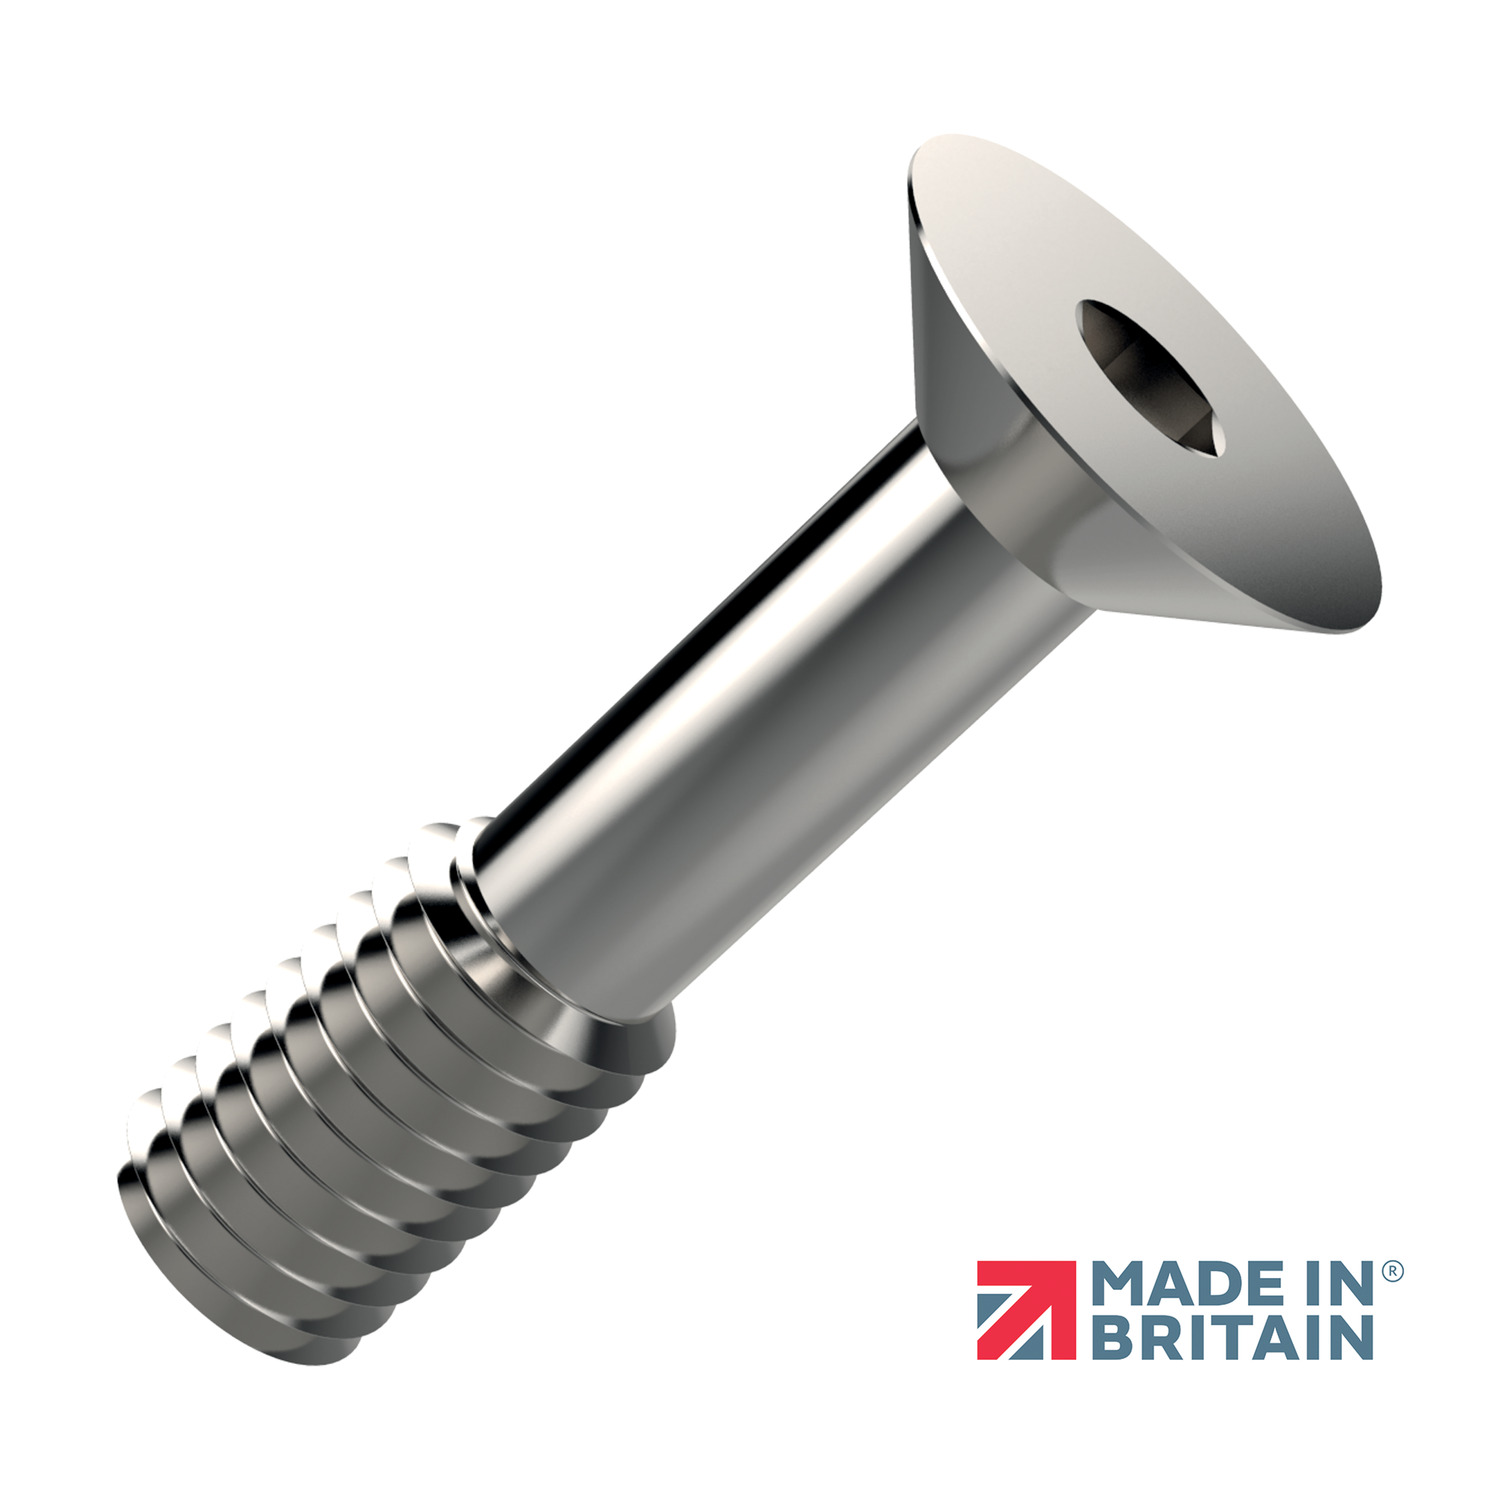 Captive Screws - Countersunk Our countersunk captive screws are available in thread sizes M2,5 - M8 and lengths 5 - 80mm. When used with a counterbored panel, they sit flush to the panel. Other dimensions, material and finishing choices are available on request.